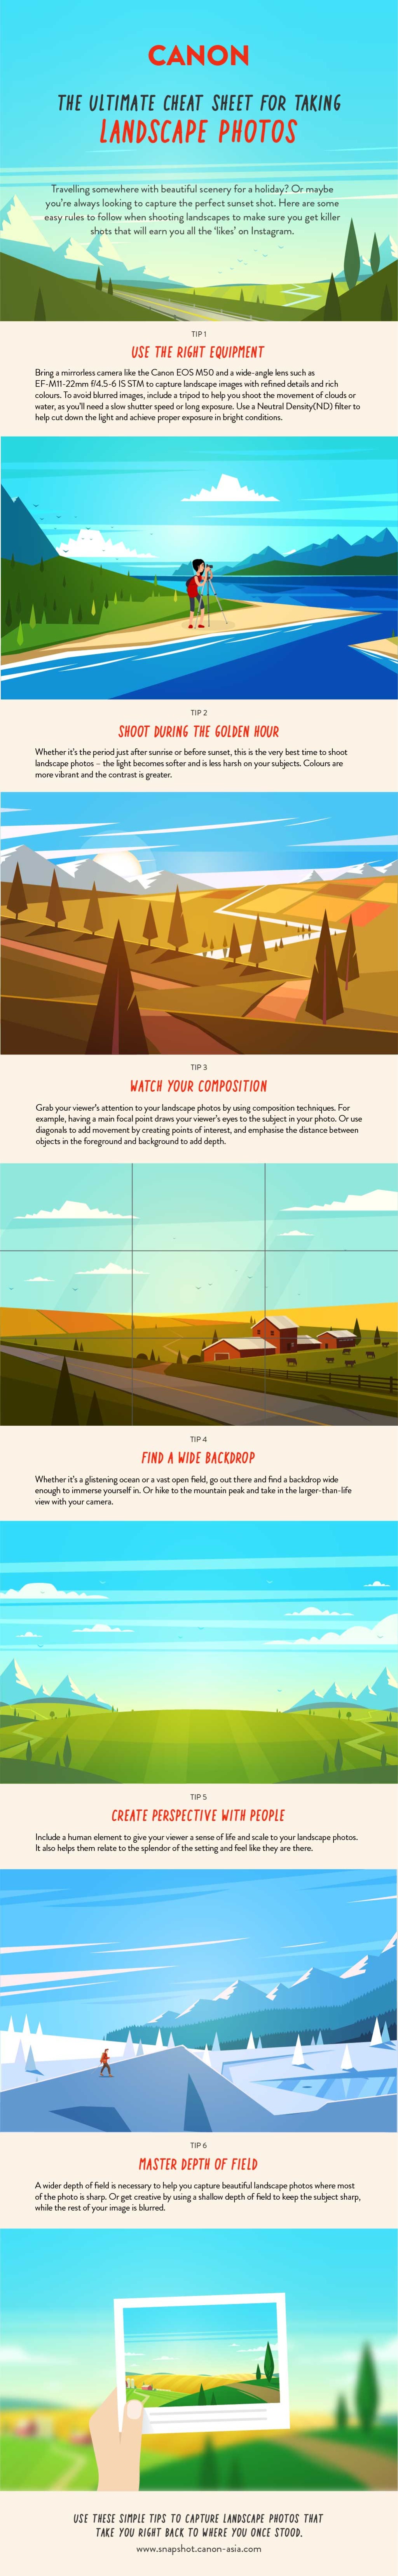 the ultimate cheat sheet for taking landscape photos